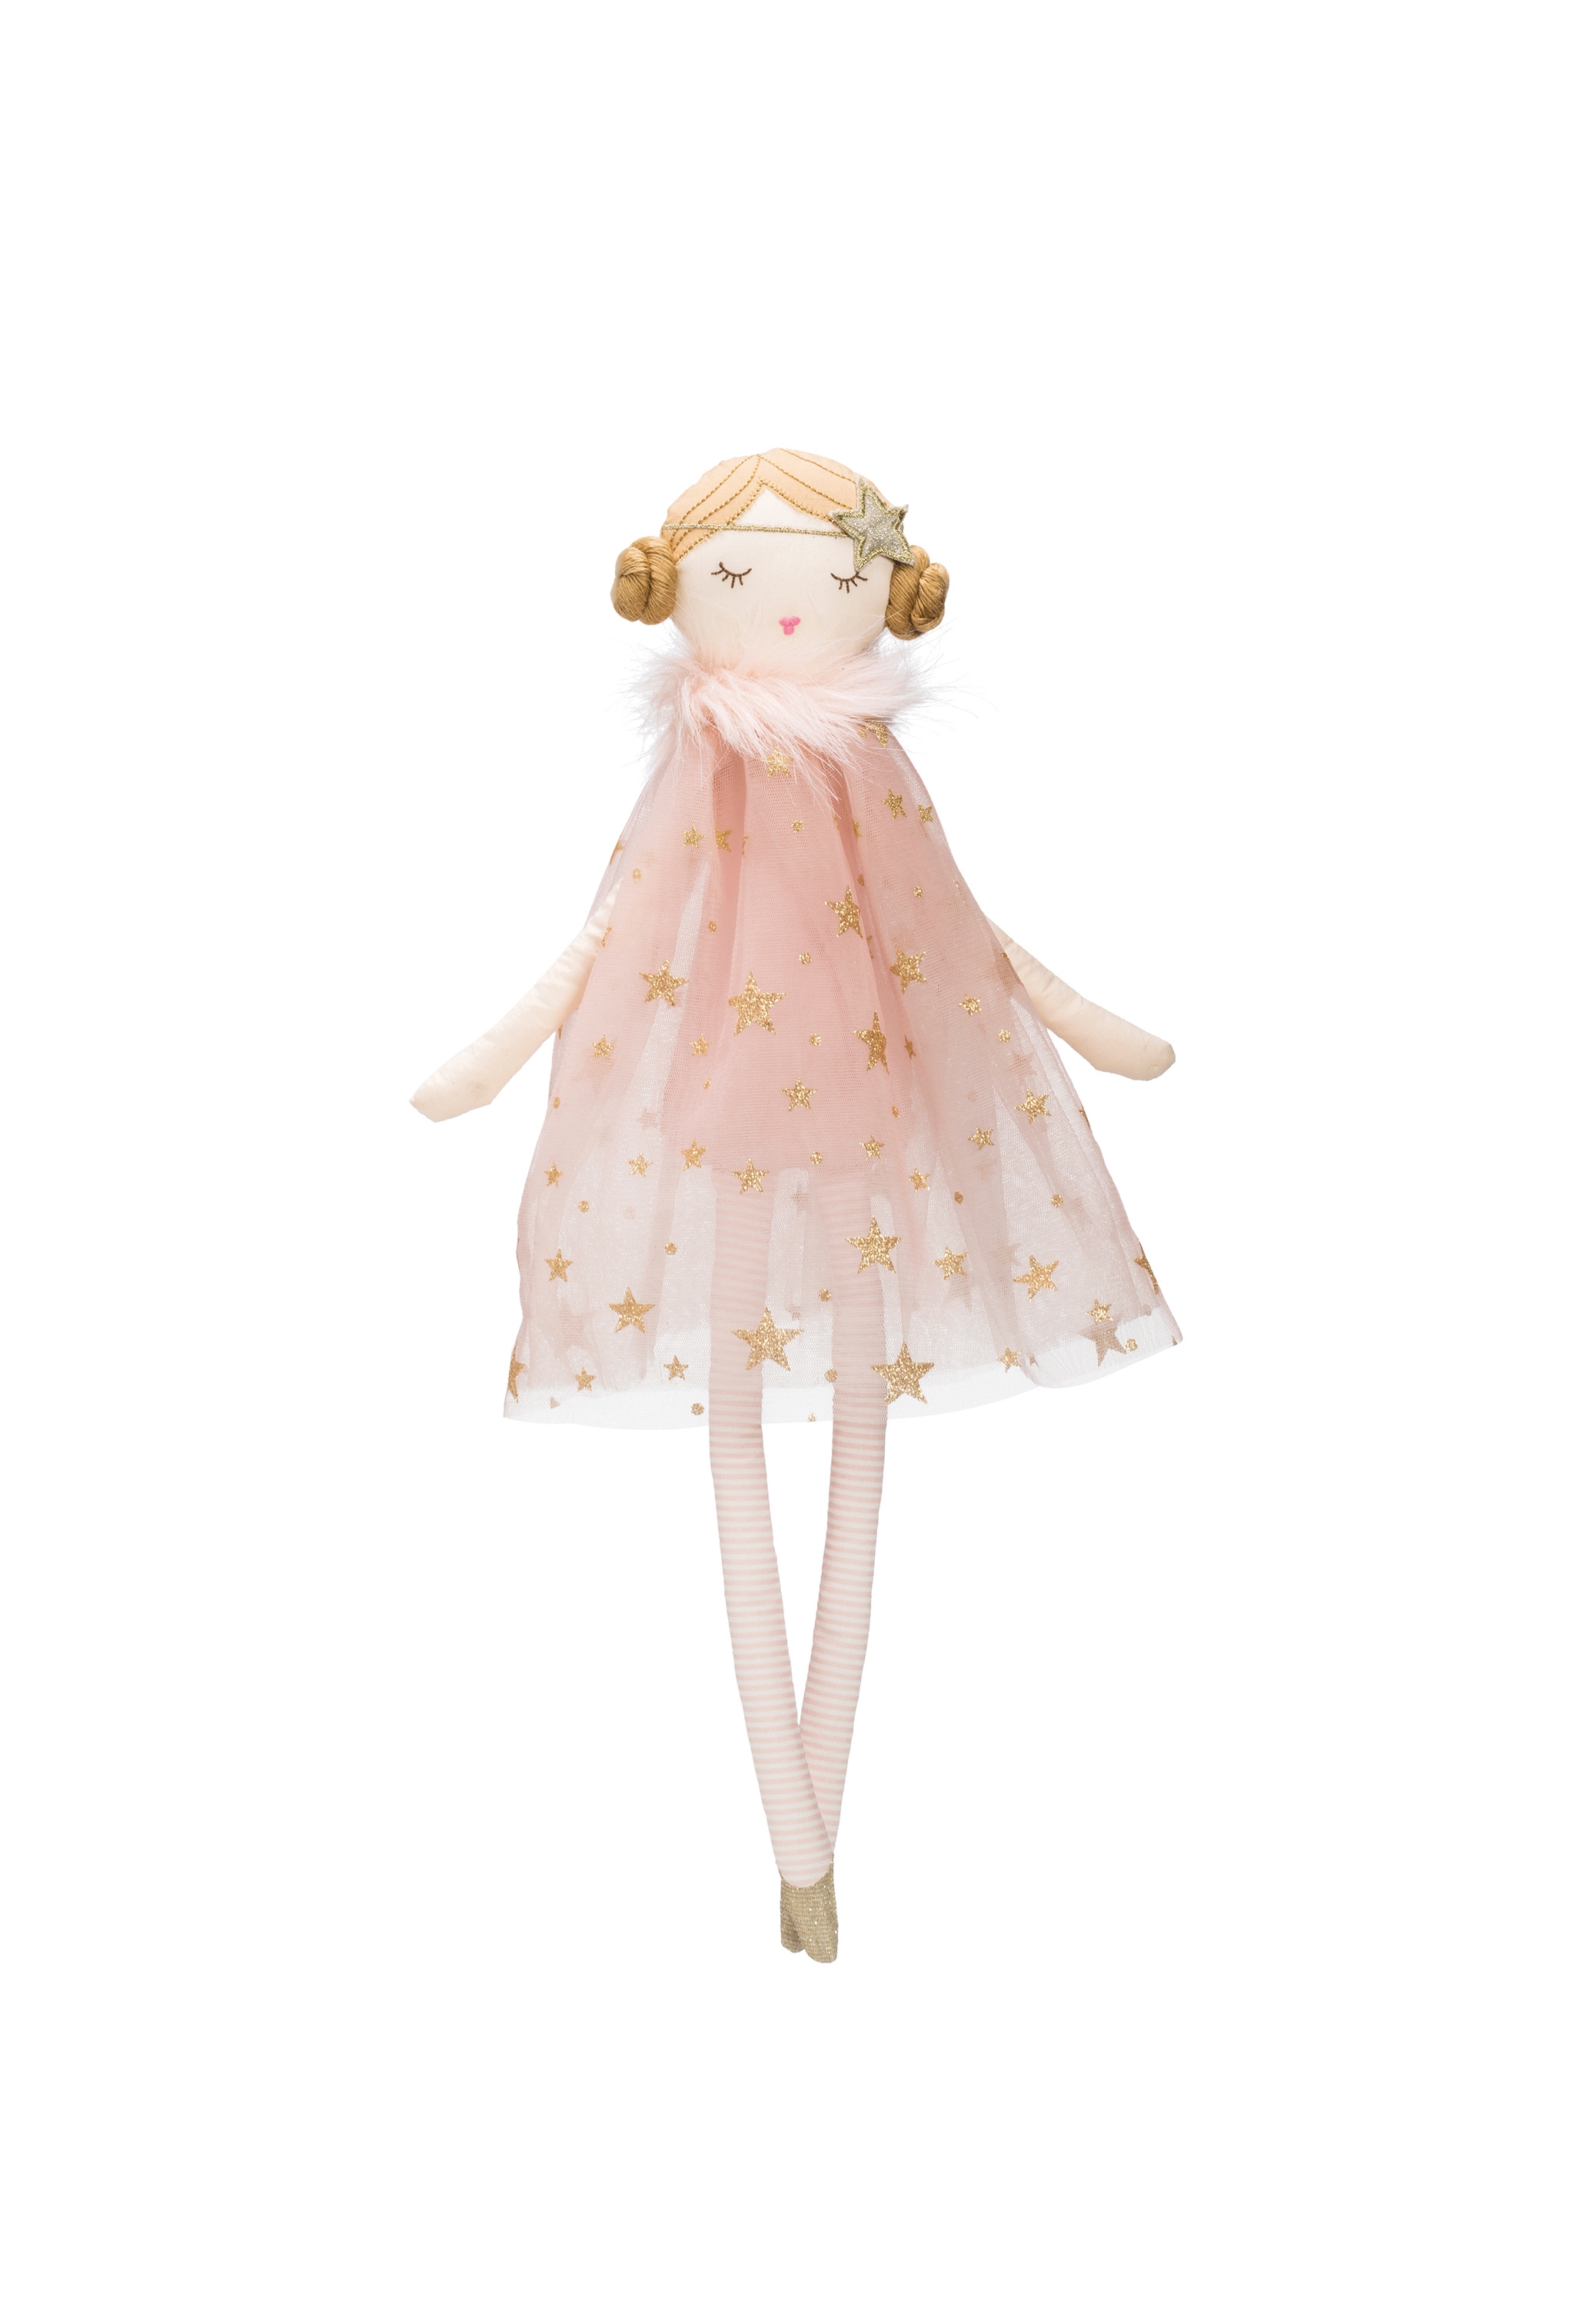 Plush Ballerina Doll with Pink & Gold Star Dress - Image 0